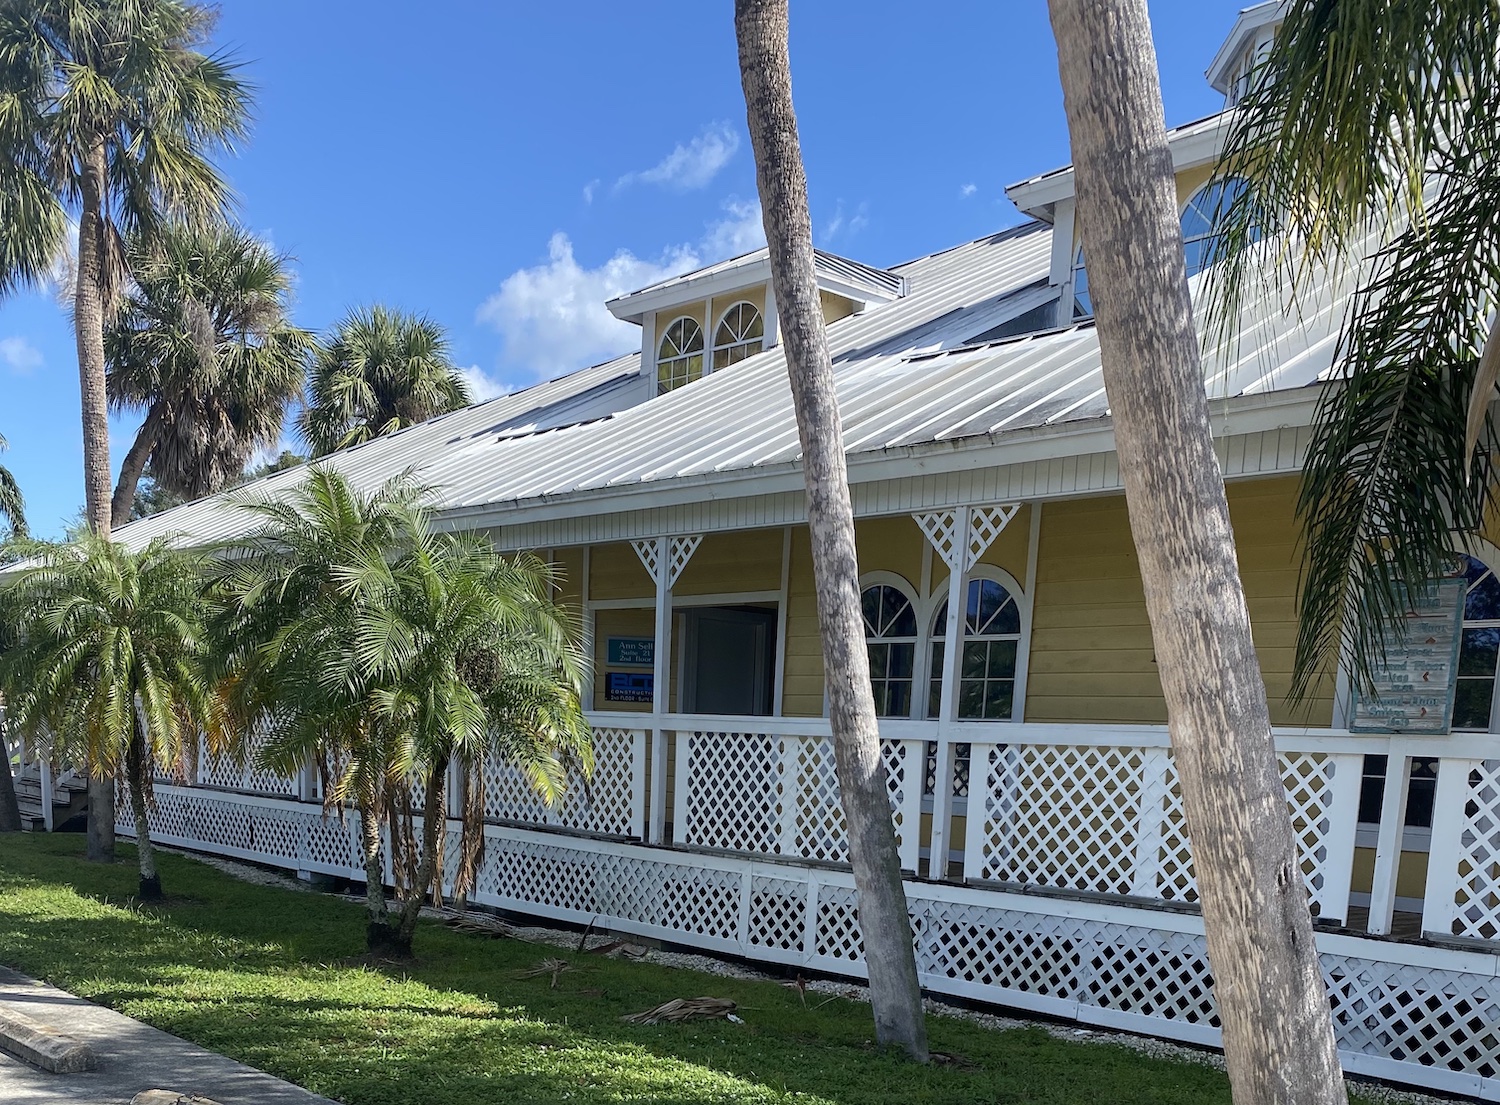 Exterior of Key West Professional Center in Fort Myers, Florida